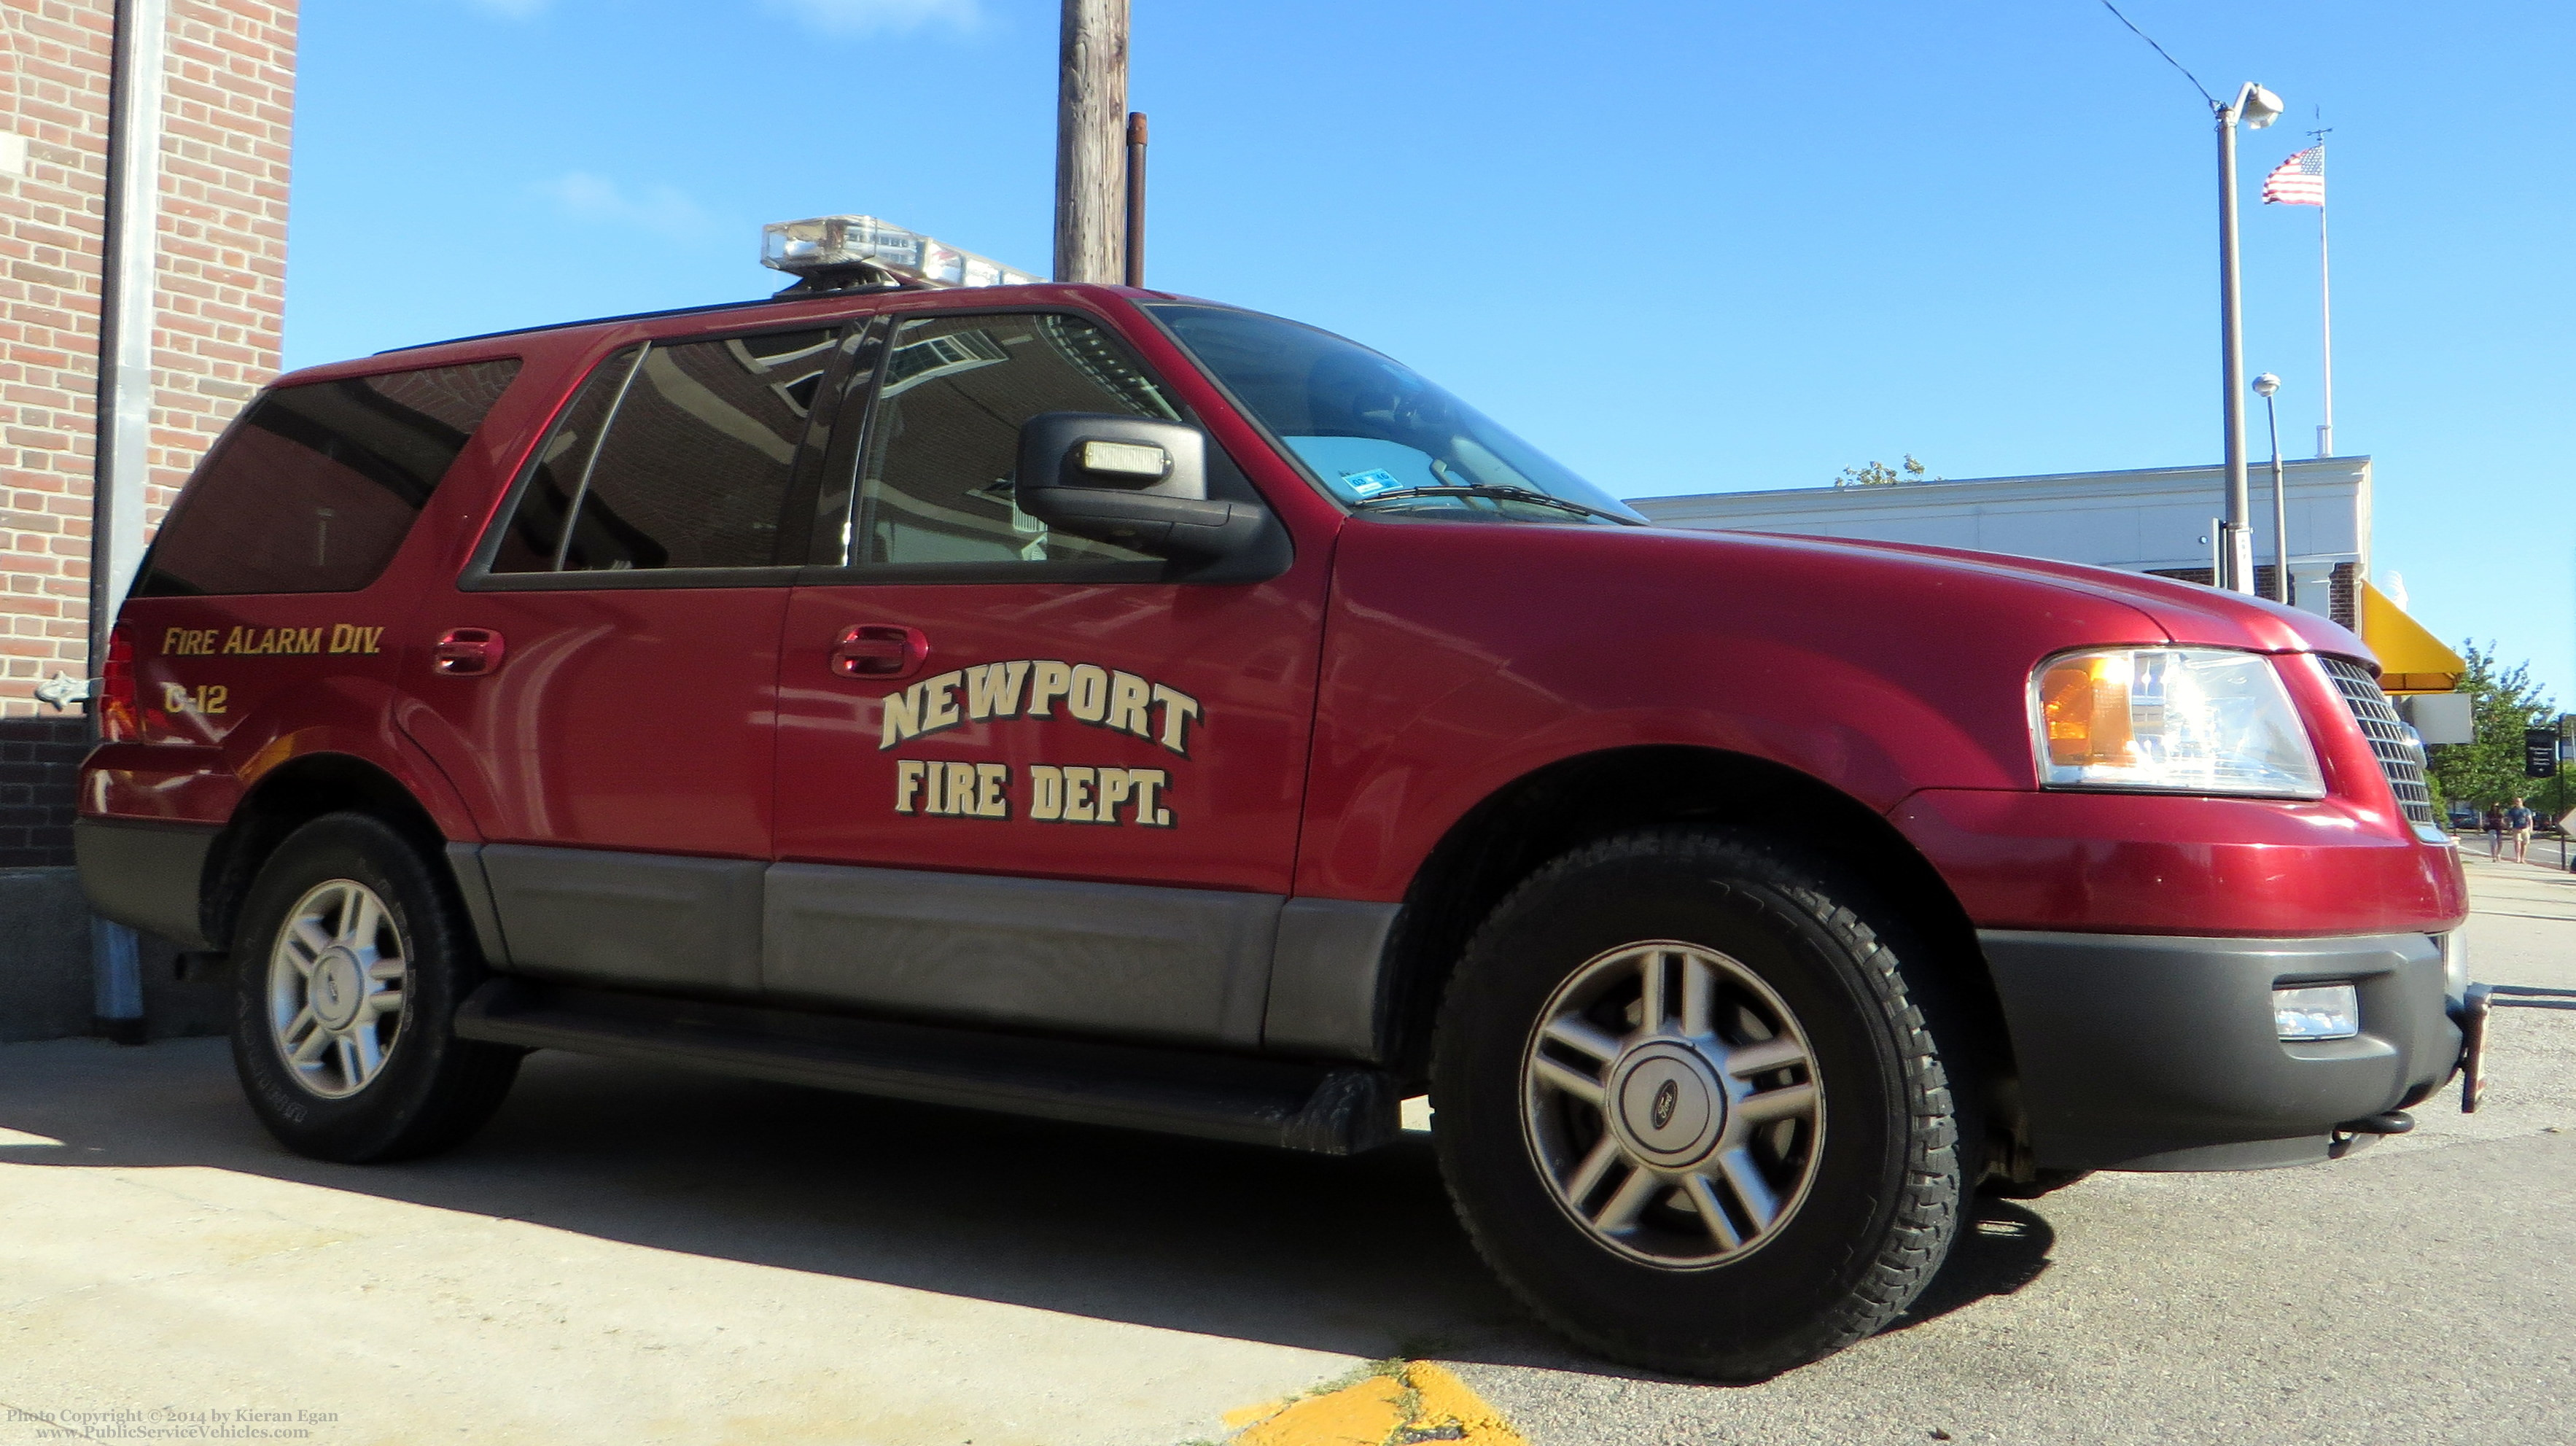 A photo  of Newport Fire
            Car 12, a 2003-2006 Ford Expedition             taken by Kieran Egan